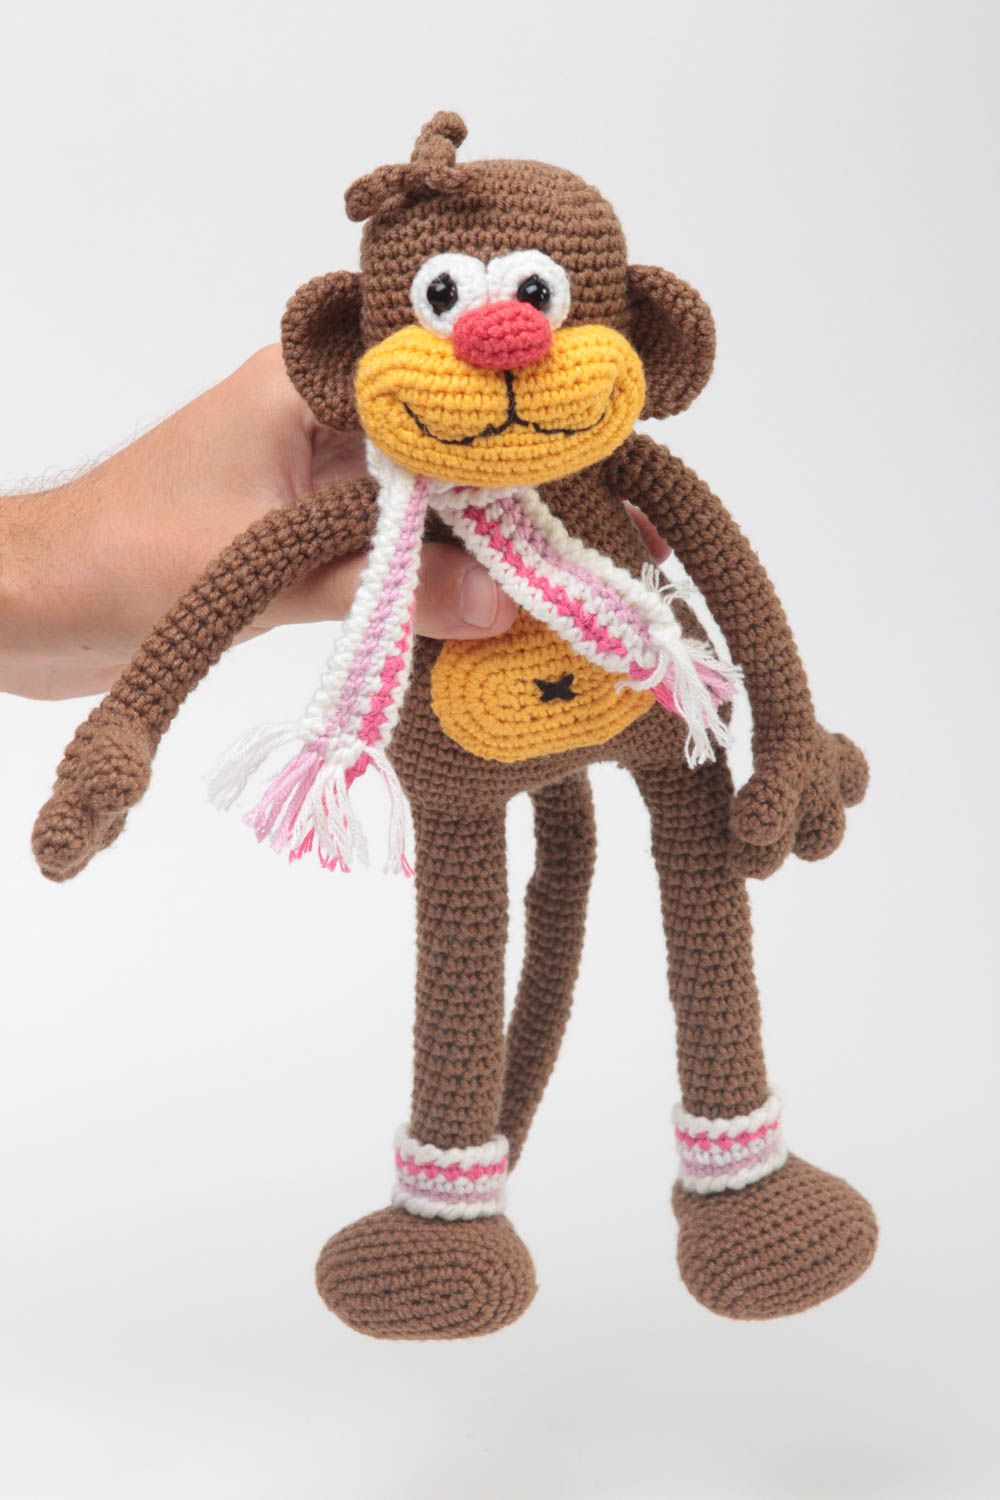 Cute handmade childrens toys crochet soft toy stuffed monkey toy gifts for kids photo 5